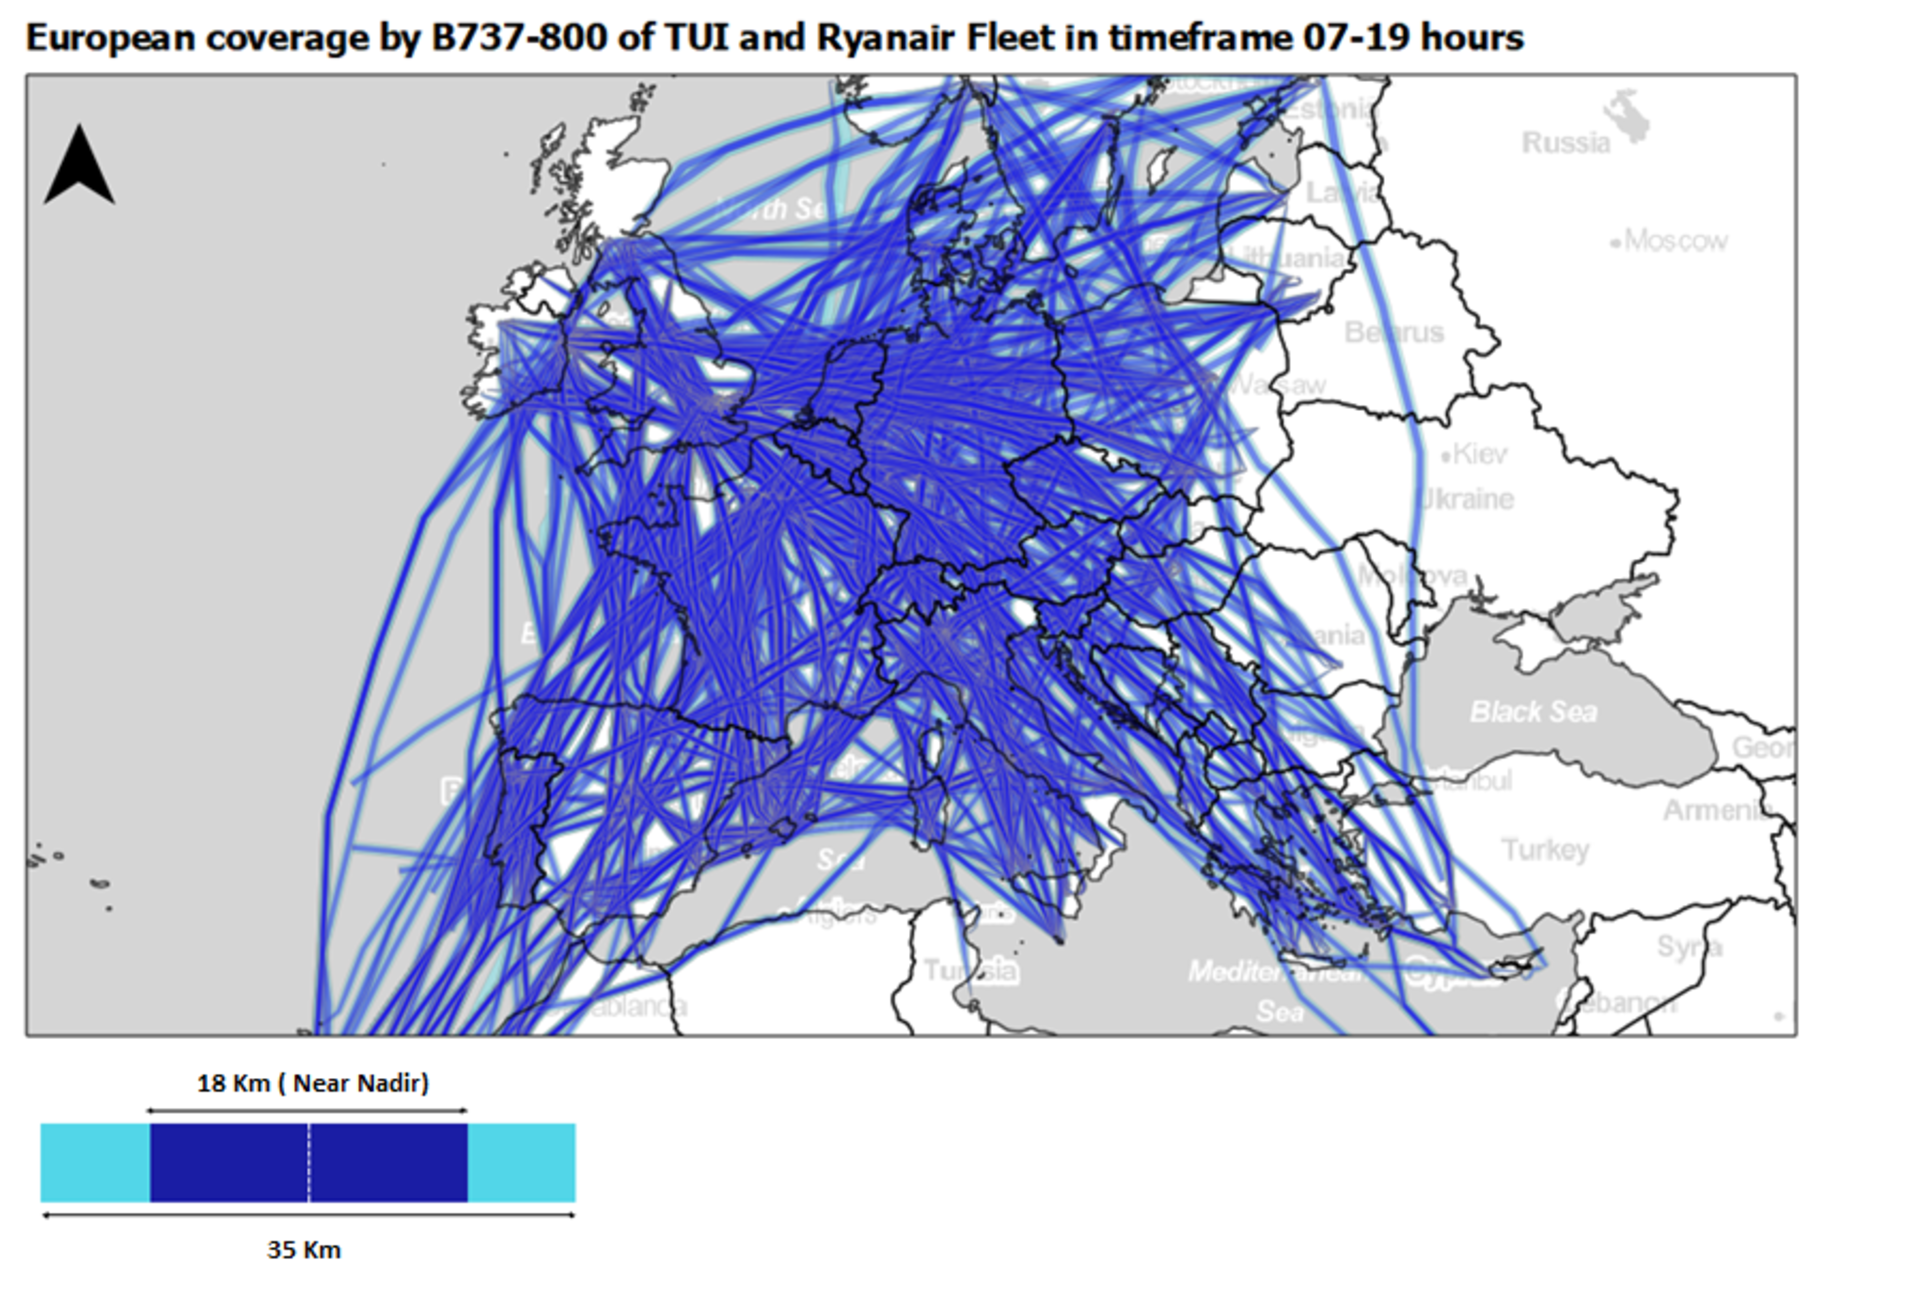 Coverage of Europe by TUI and Ryanair fleets in a day